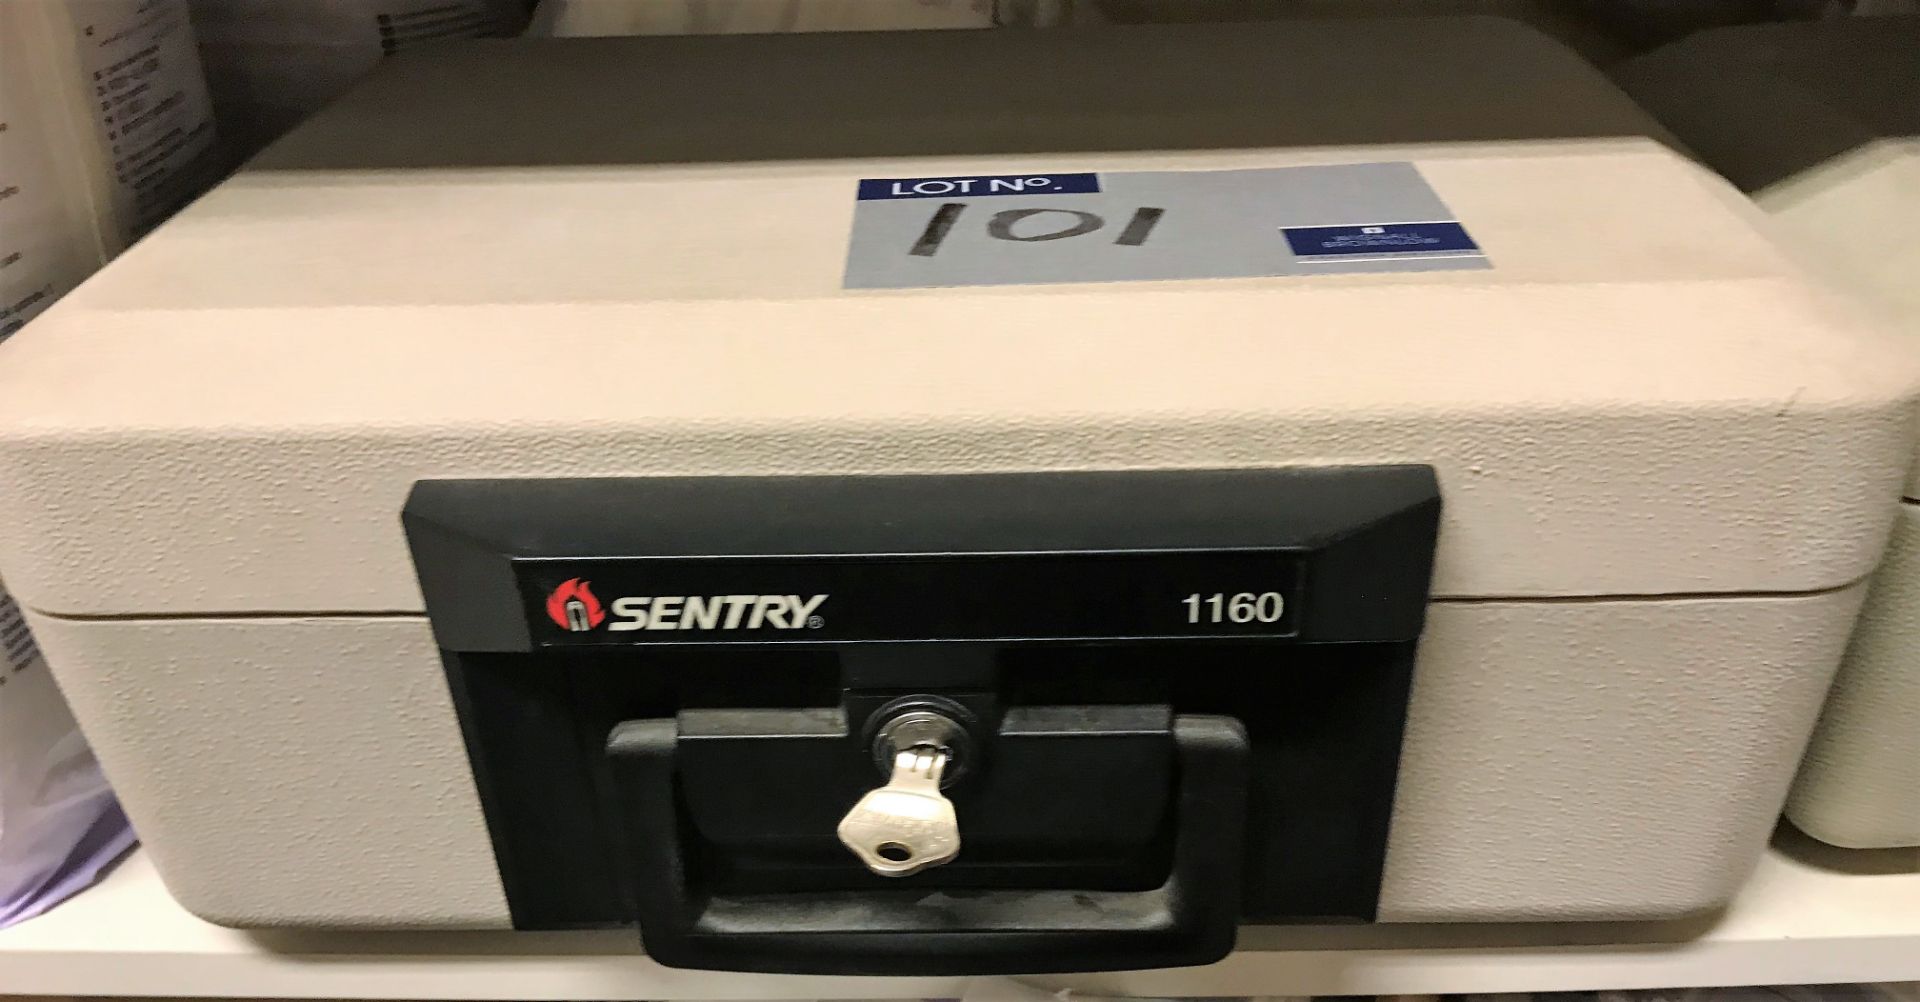 2 Sentry Data Safes, Model 1160 and 1100 (with keys). - Image 2 of 3